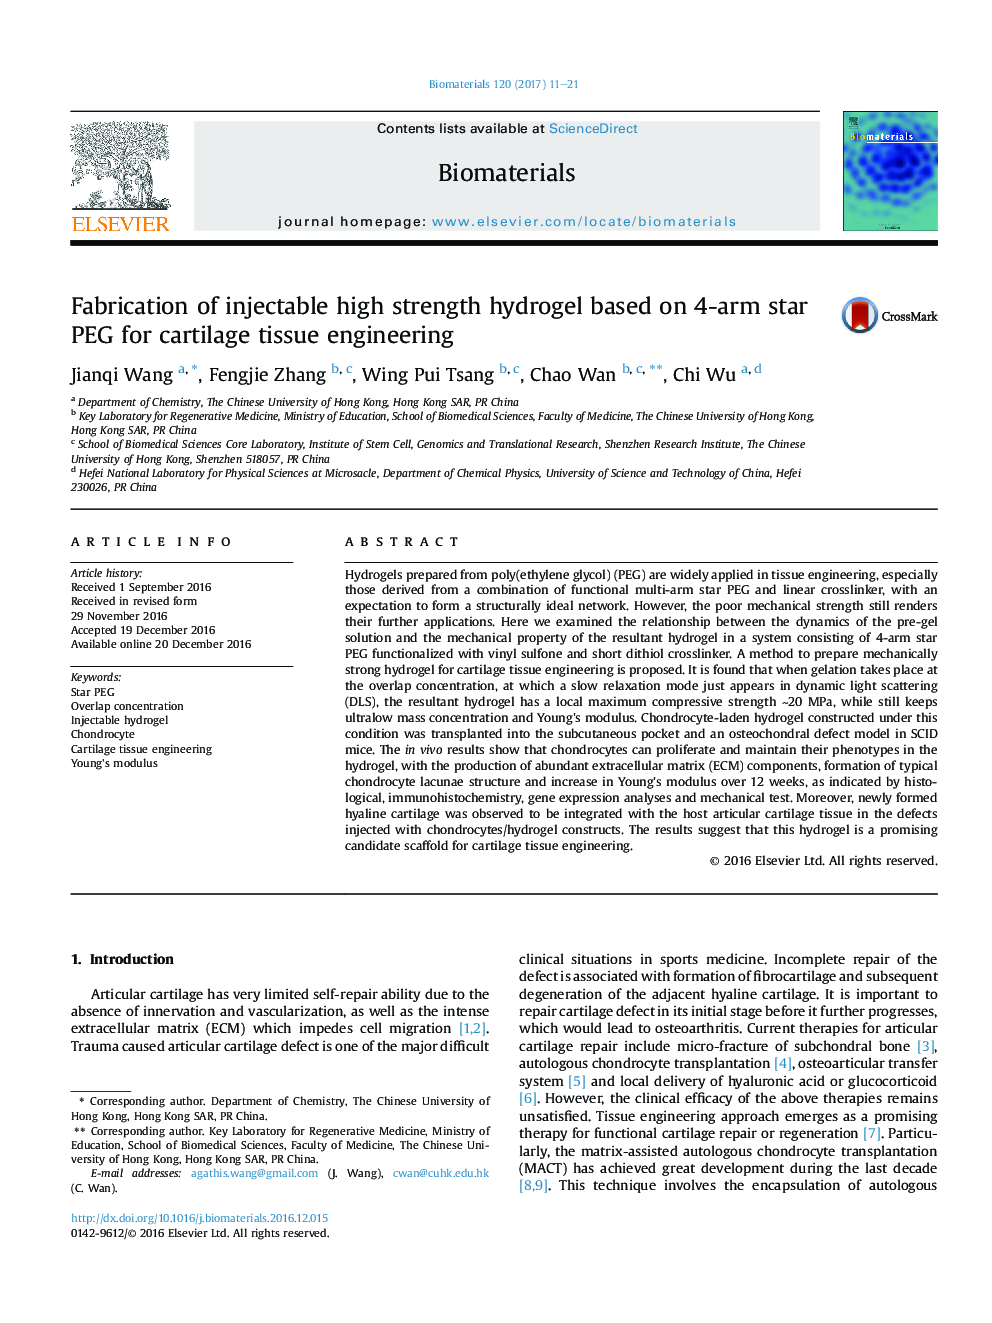 Fabrication of injectable high strength hydrogel based on 4-arm star PEG for cartilage tissue engineering